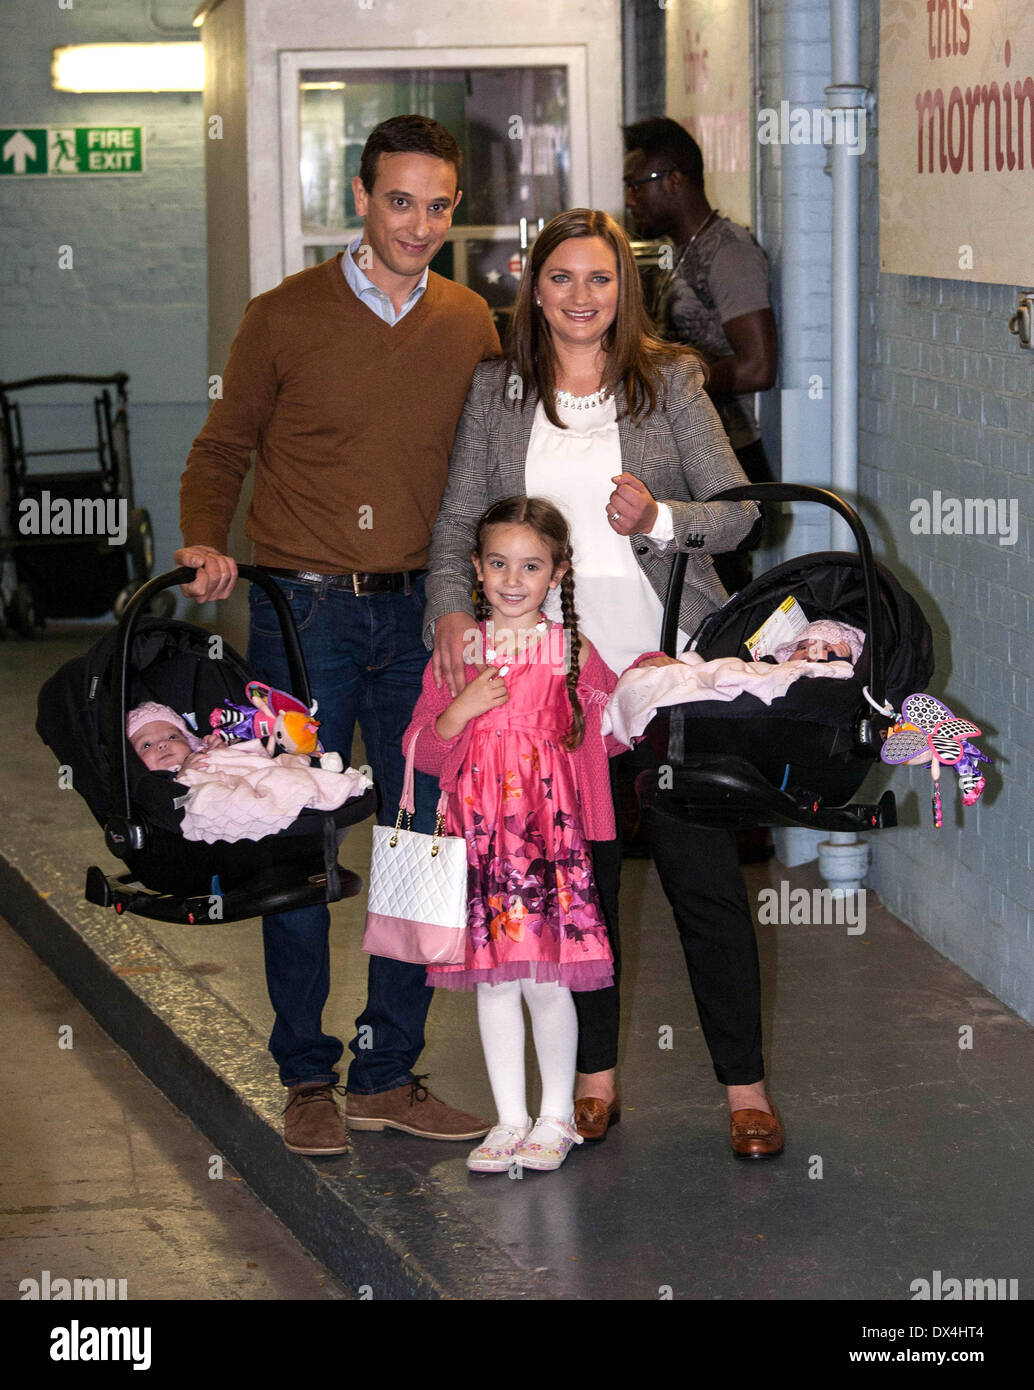 Conjoined twins Rosie and Ruby Formosa with their parents Angela and Daniel and sibling Lily outside the ITV studios London, England - 19.10.12 Where: London, United Kingdom When: 19 Oct 2012 Stock Photo